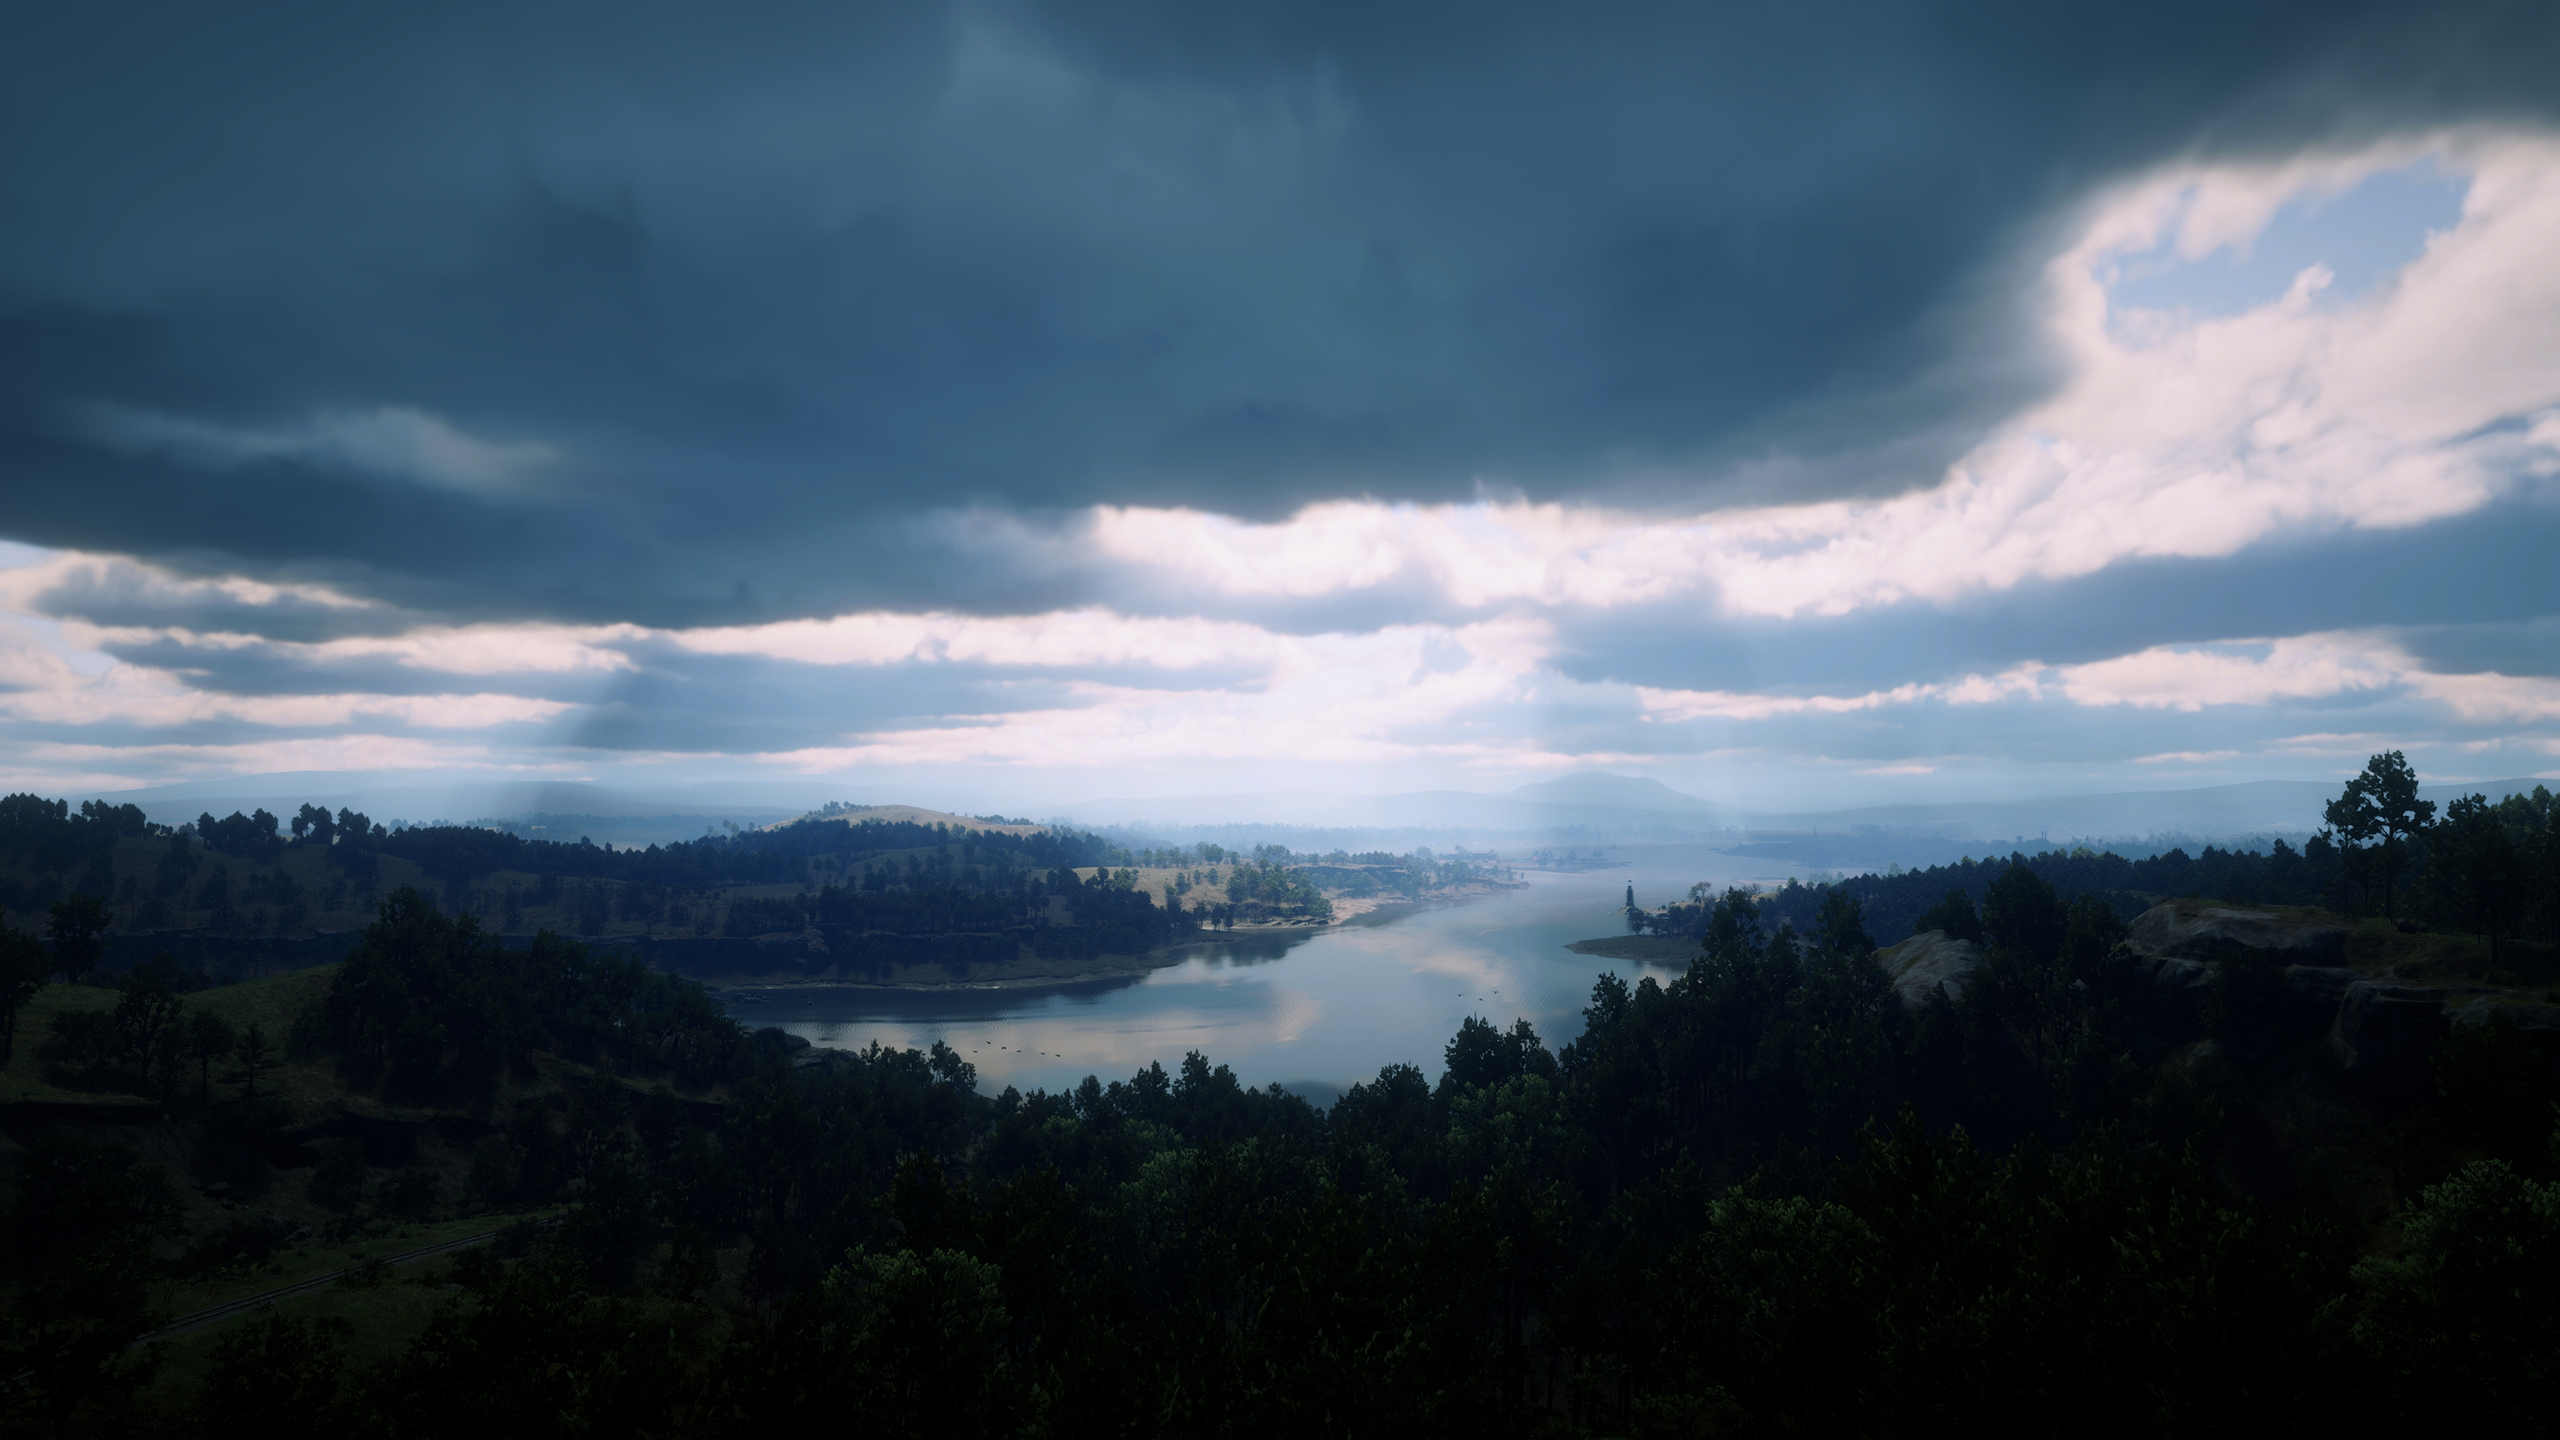 Red Dead Redemption 2 PC Gaming Video Games Landscape Nature Overcast Flood 2560x1440